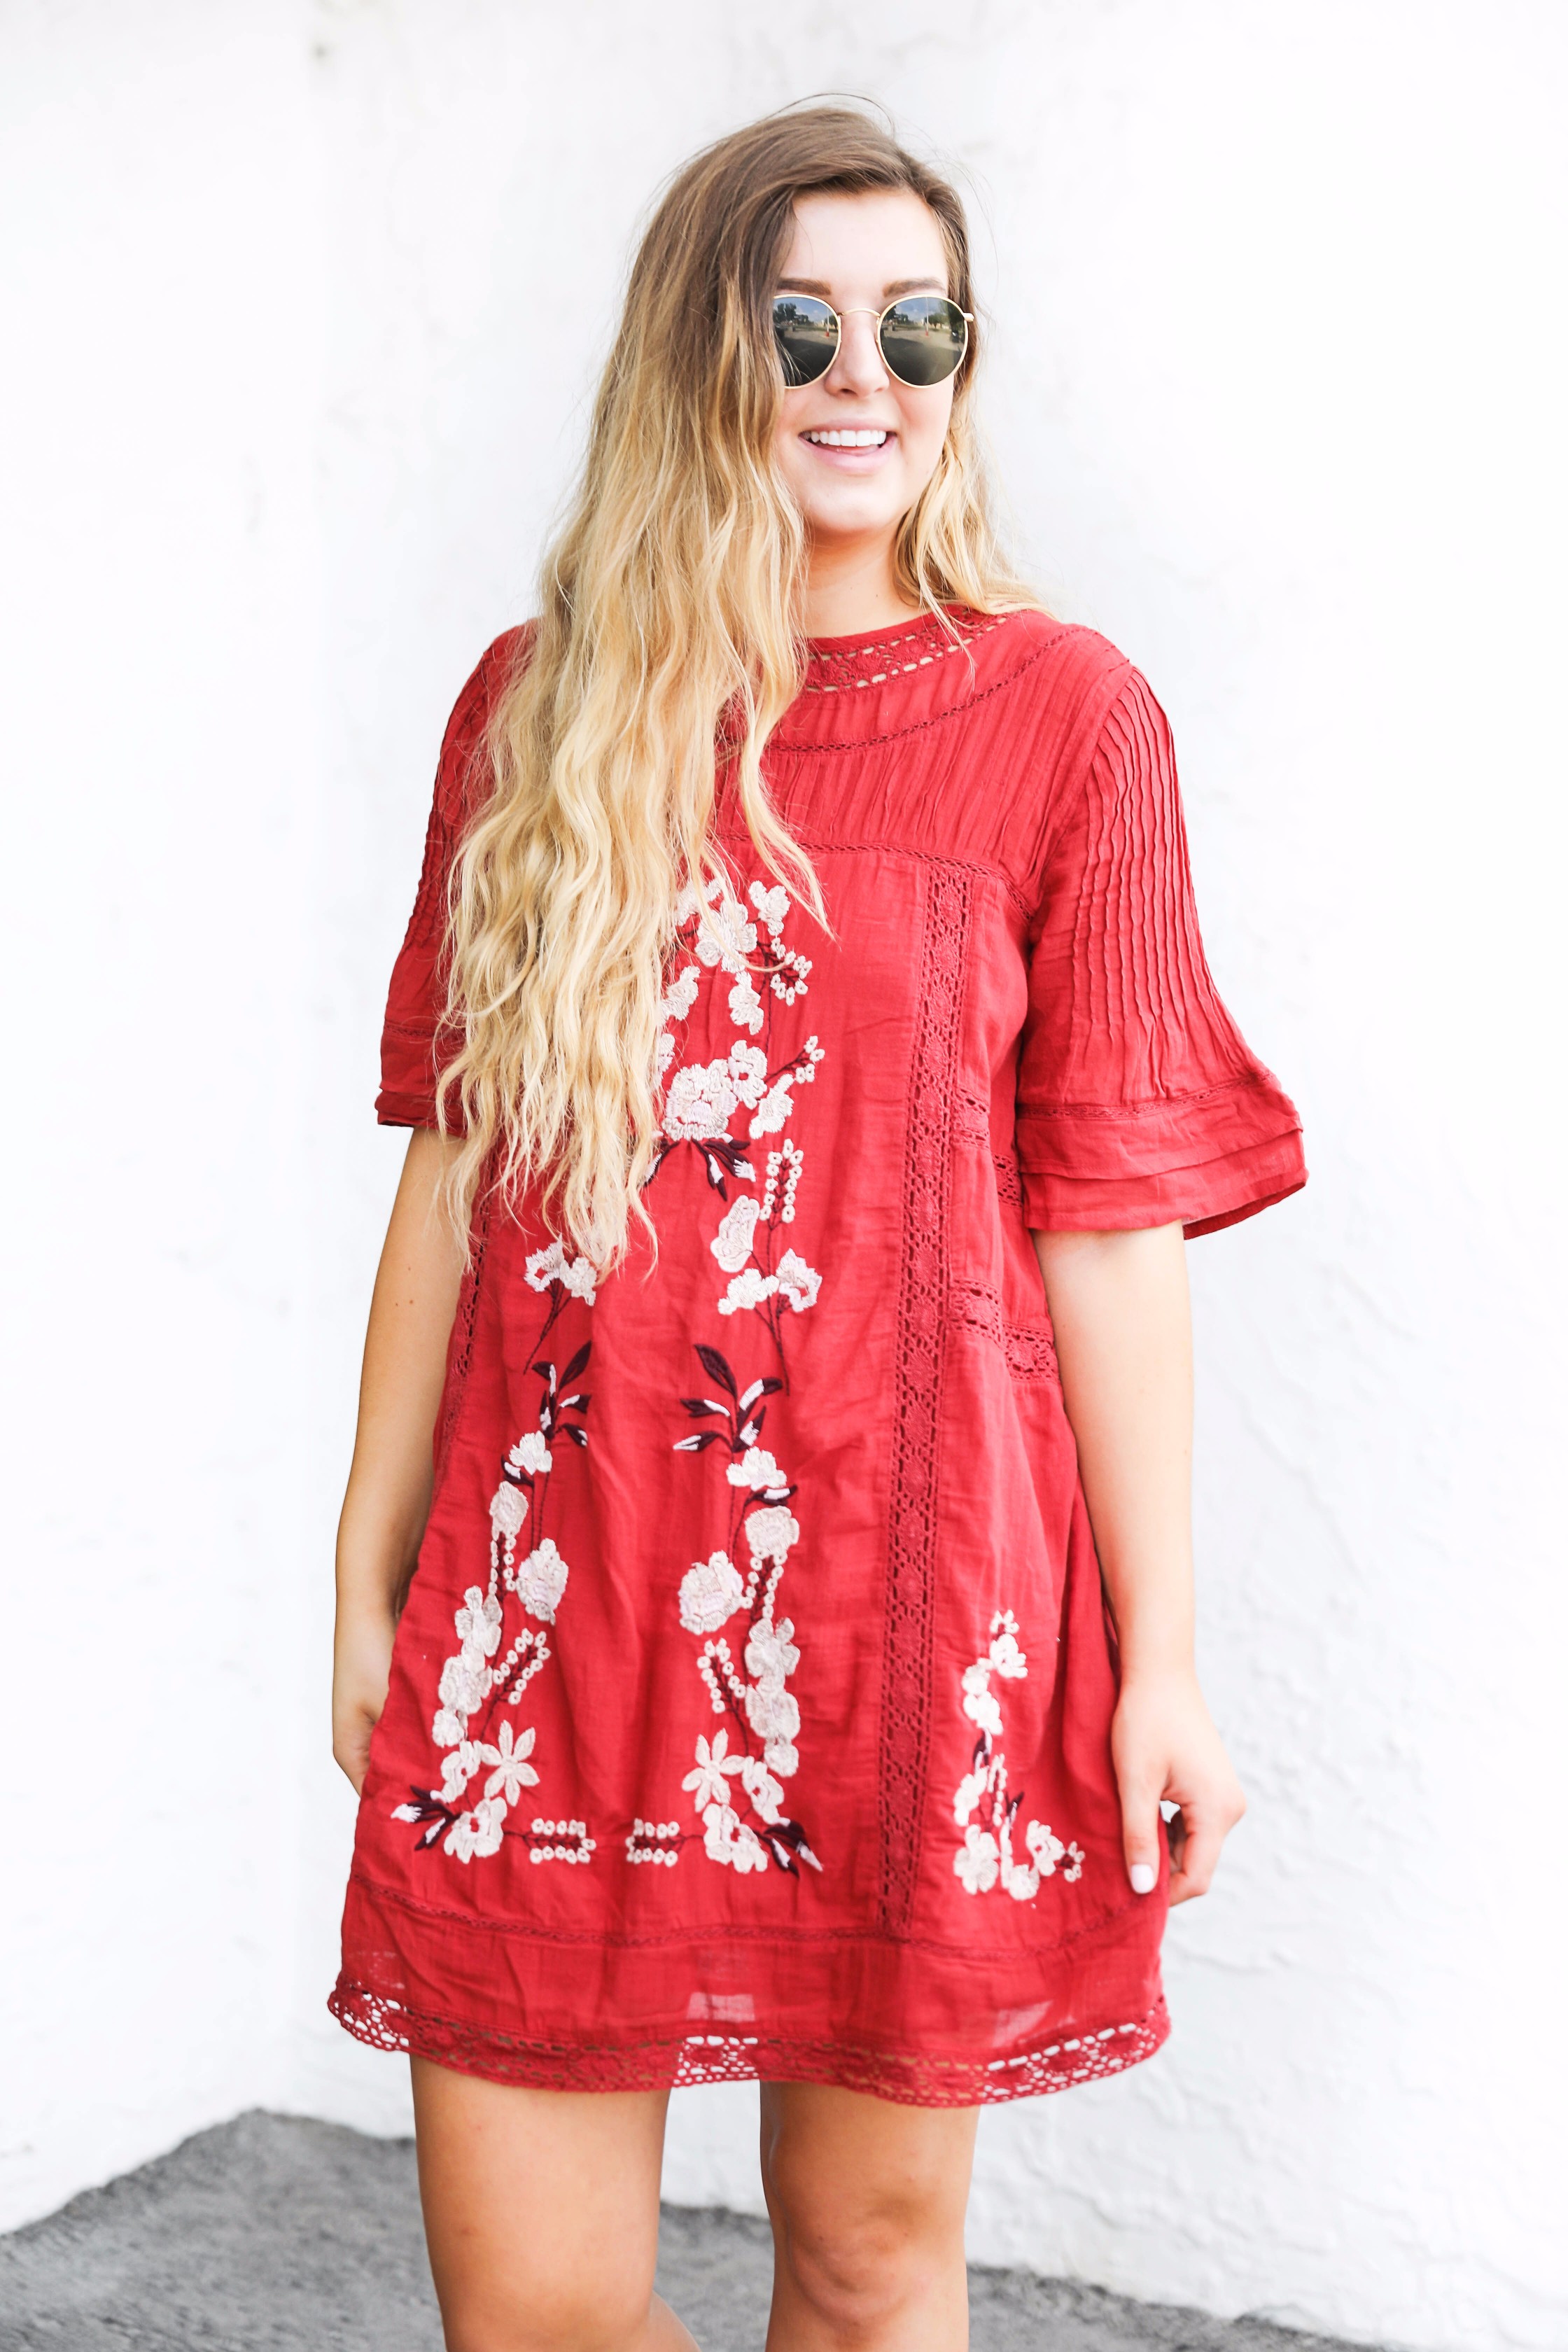 Red free people fall dress! I love this bright red color for fall. There are so many ways to wear this! It would be super cute with boots or booties! by fashion blogger lauren lindmark on daily dose of charm